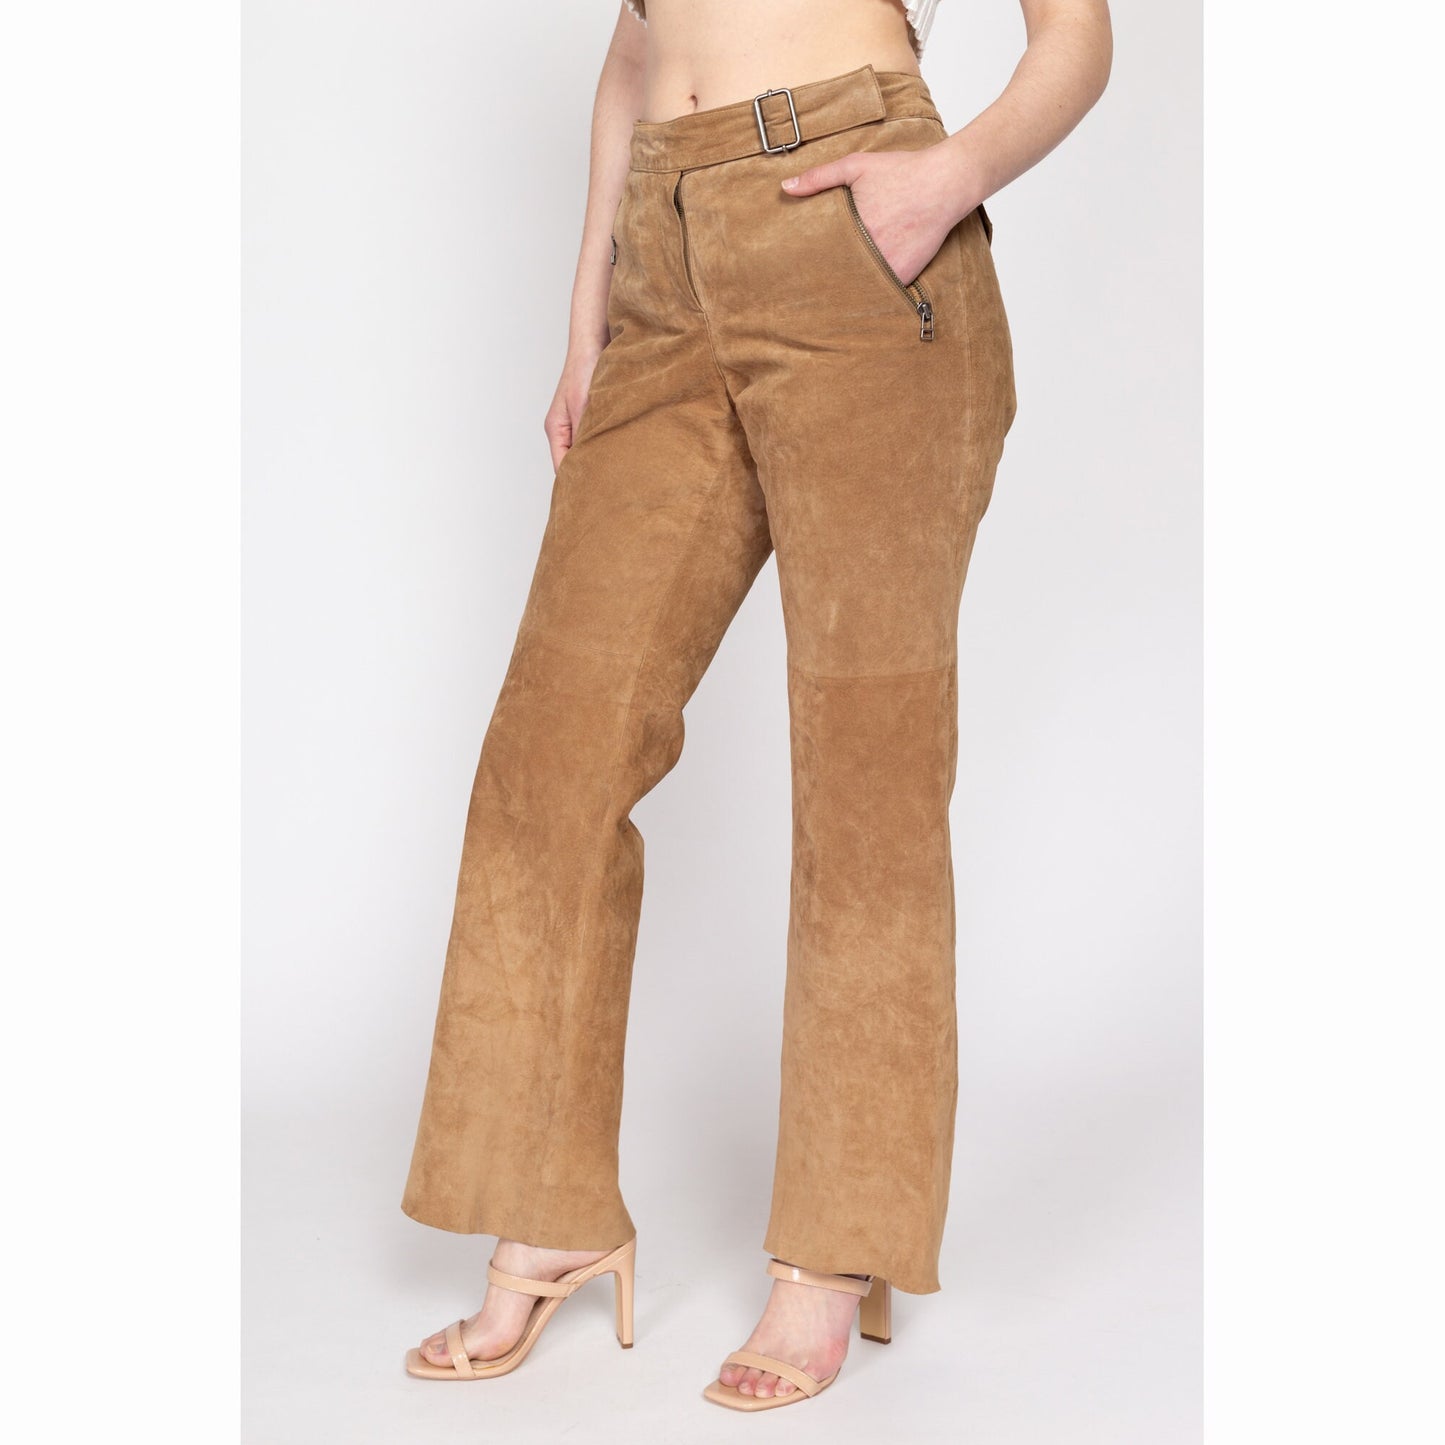 Medium 90s Tan Suede Western Trousers | Vintage Mid Rise Bootcut Leather Pants